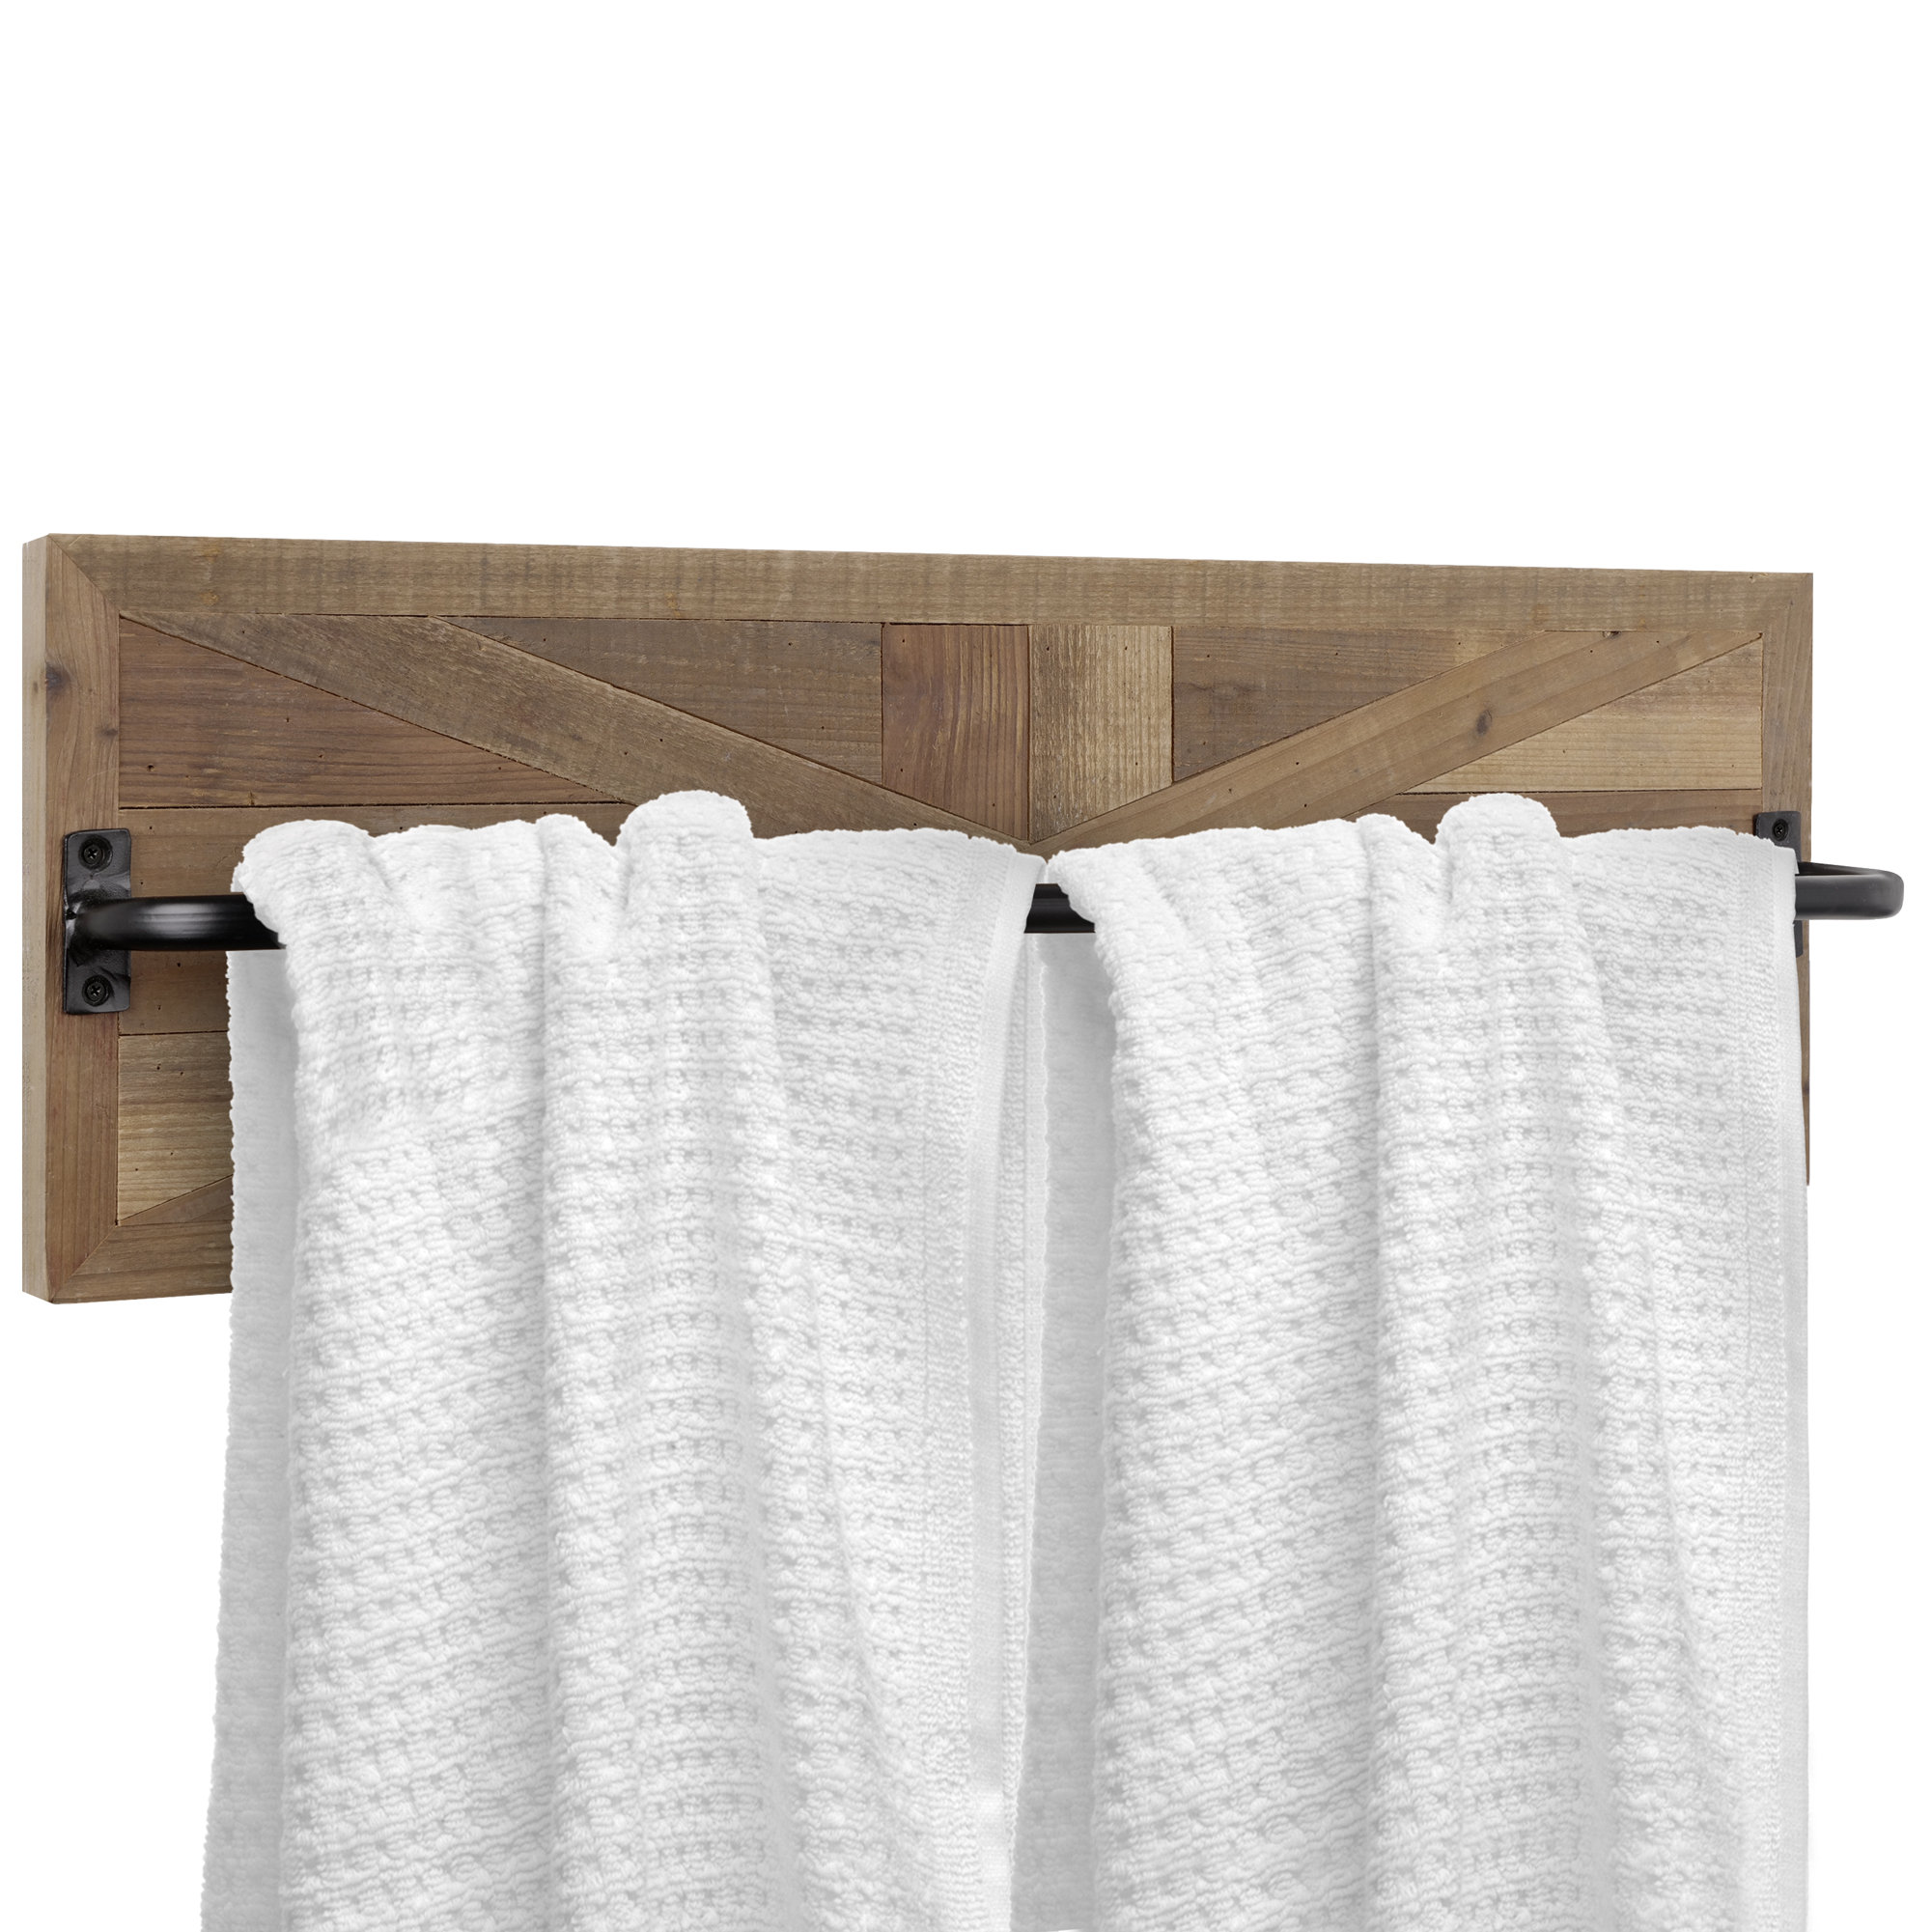 Autumn Alley Rustic Farmhouse Toilet Paper Holder - Farmhouse Bathroom  Rustic Country Decor - Rustic Bathroom Accessories with Warm Brown Wood,  Galvanized Metal & Black Metal - Adds Rustic Charm Brown, Galvanized, Black